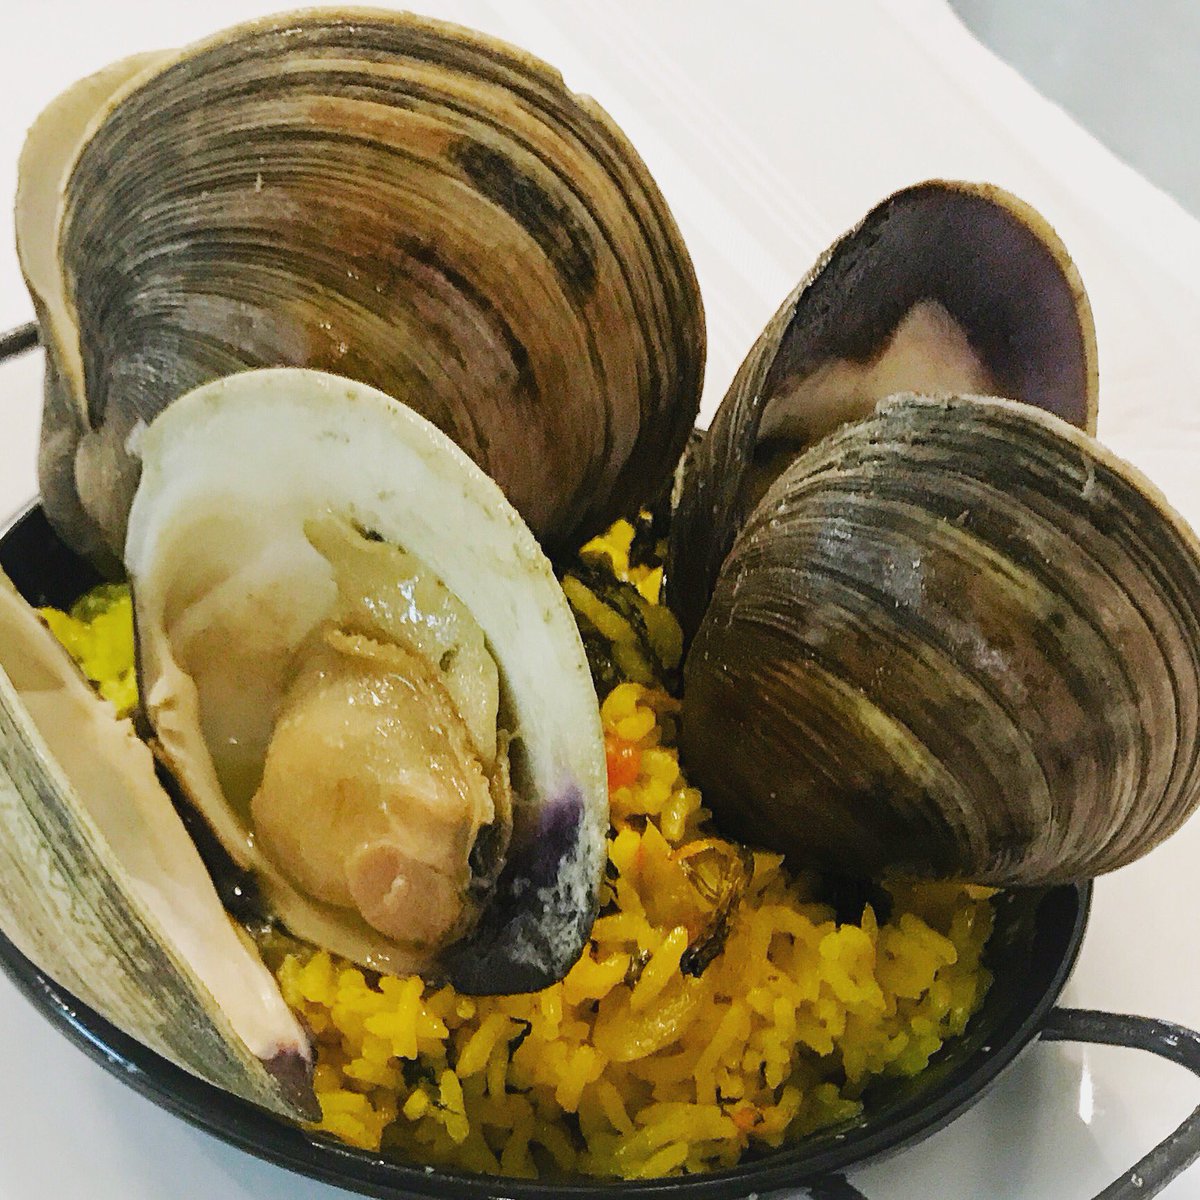 Summer in Cuba tastes like the sea. Experience that feeling with our “Arroz con almejas”, saffron rice with NC clams. #Durham #seatotable